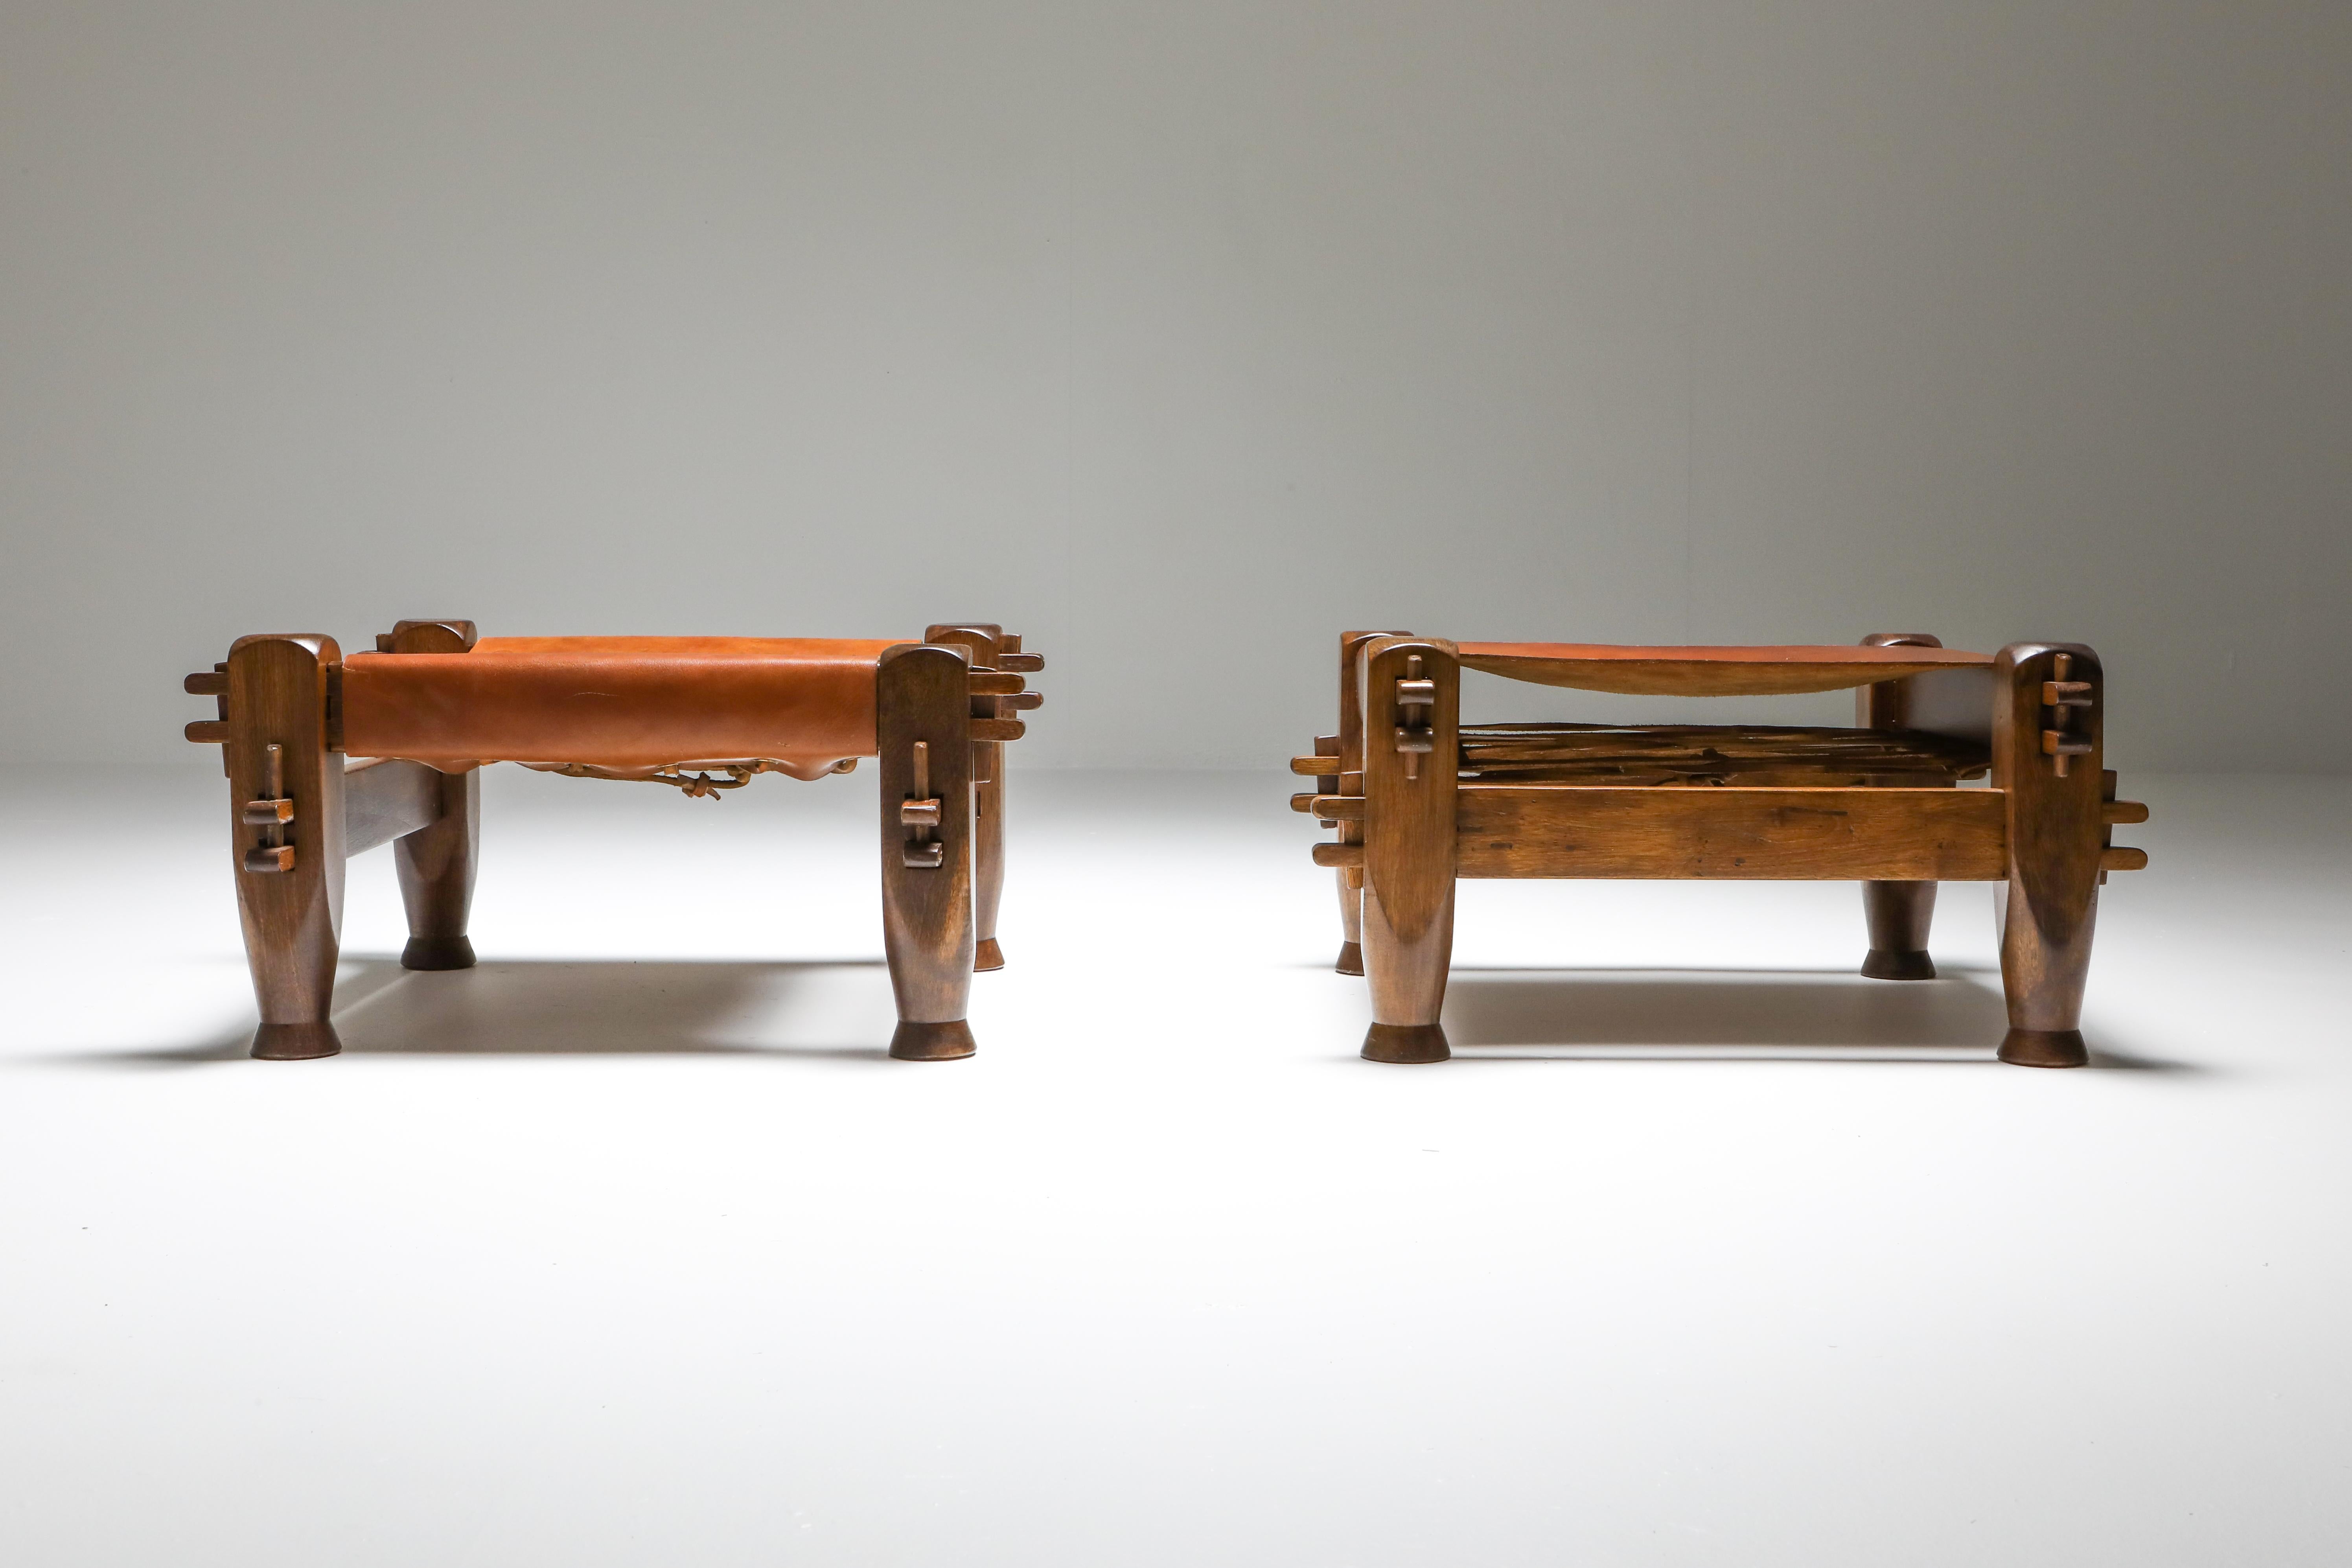 Brazilian Modern Brutalist Pair of Stools, Brazil, 1960s In Good Condition For Sale In Antwerp, BE